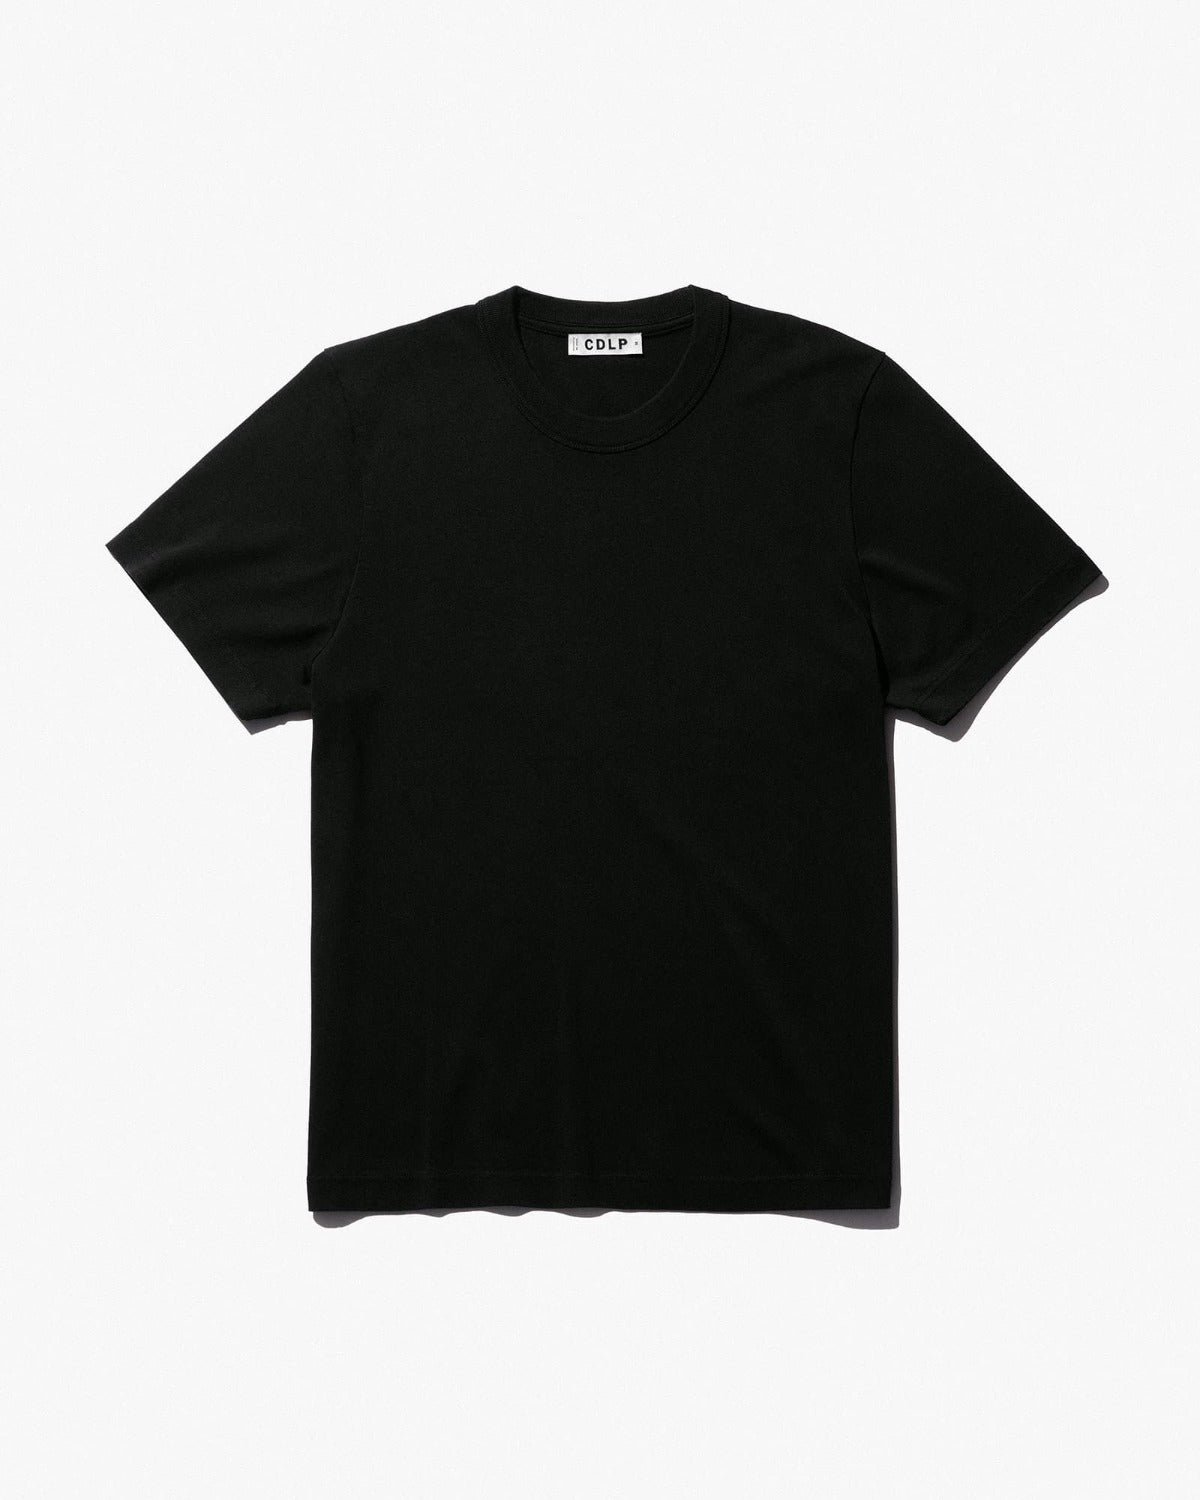 EXTREMELY THICK” Box Logo Tee – DUMBTHICKDRIP